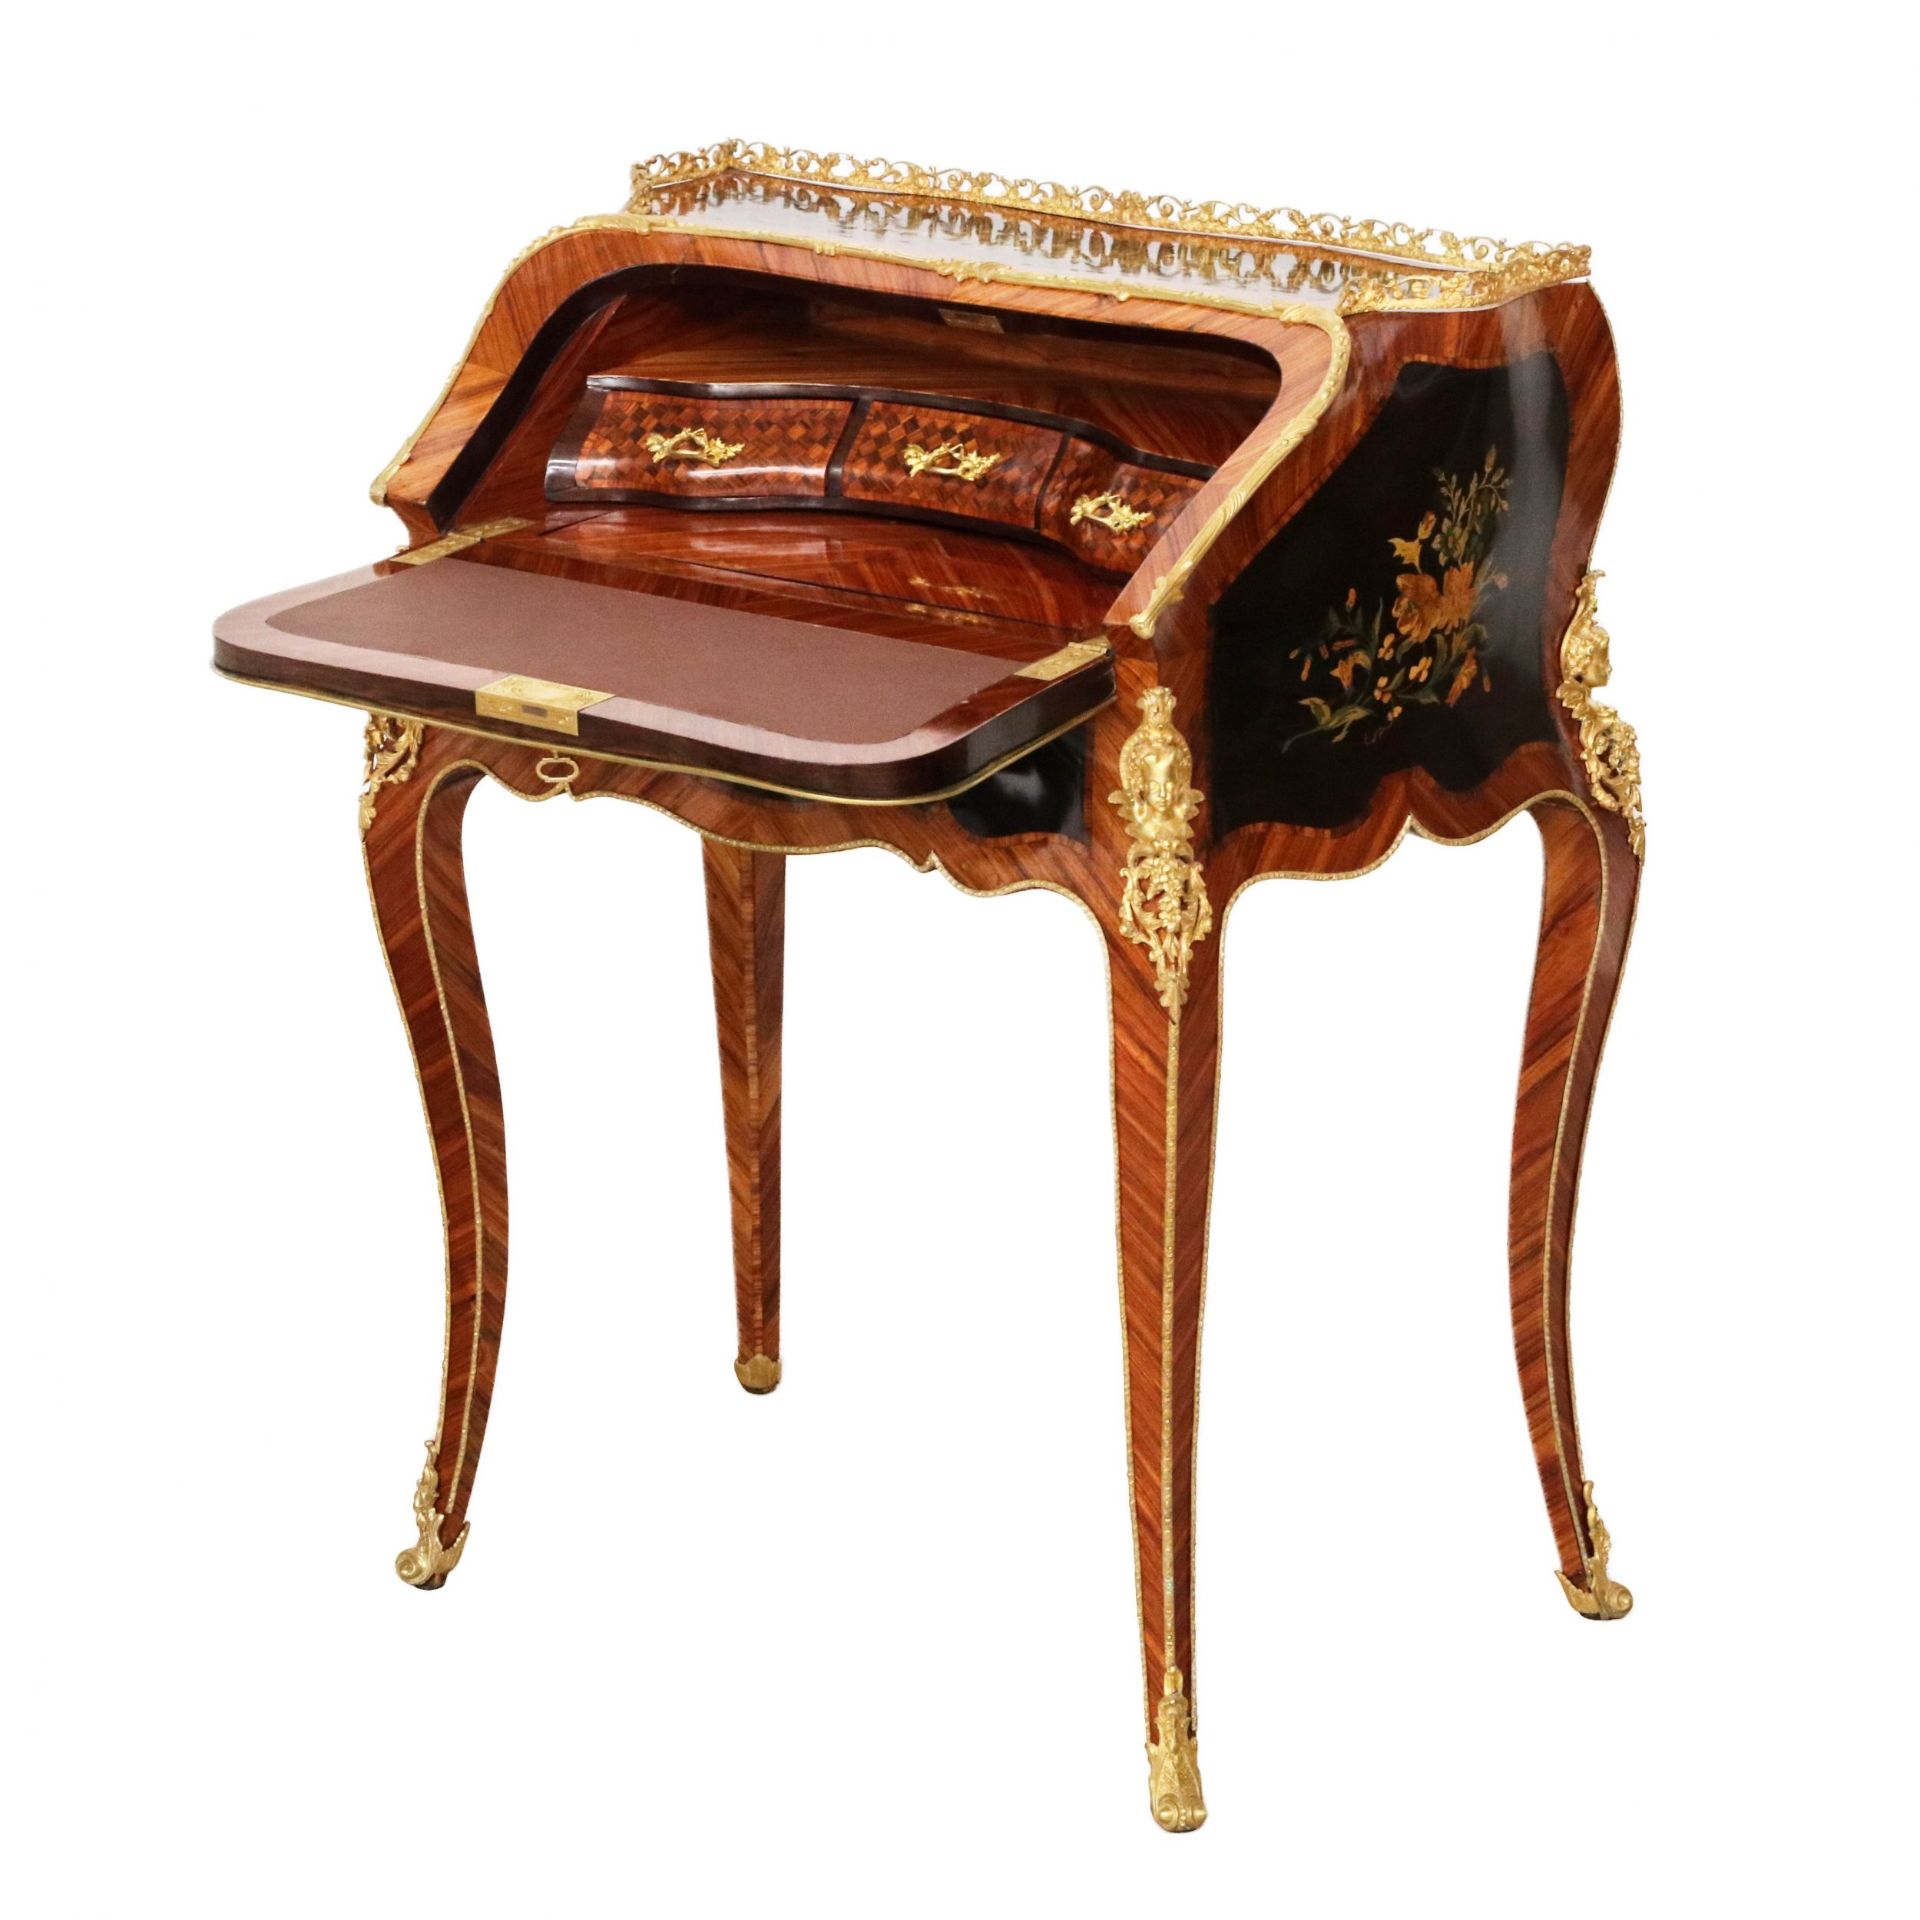 Coquettish ladies` bureau in wood and gilded bronze, Louis XV style. - Image 3 of 11